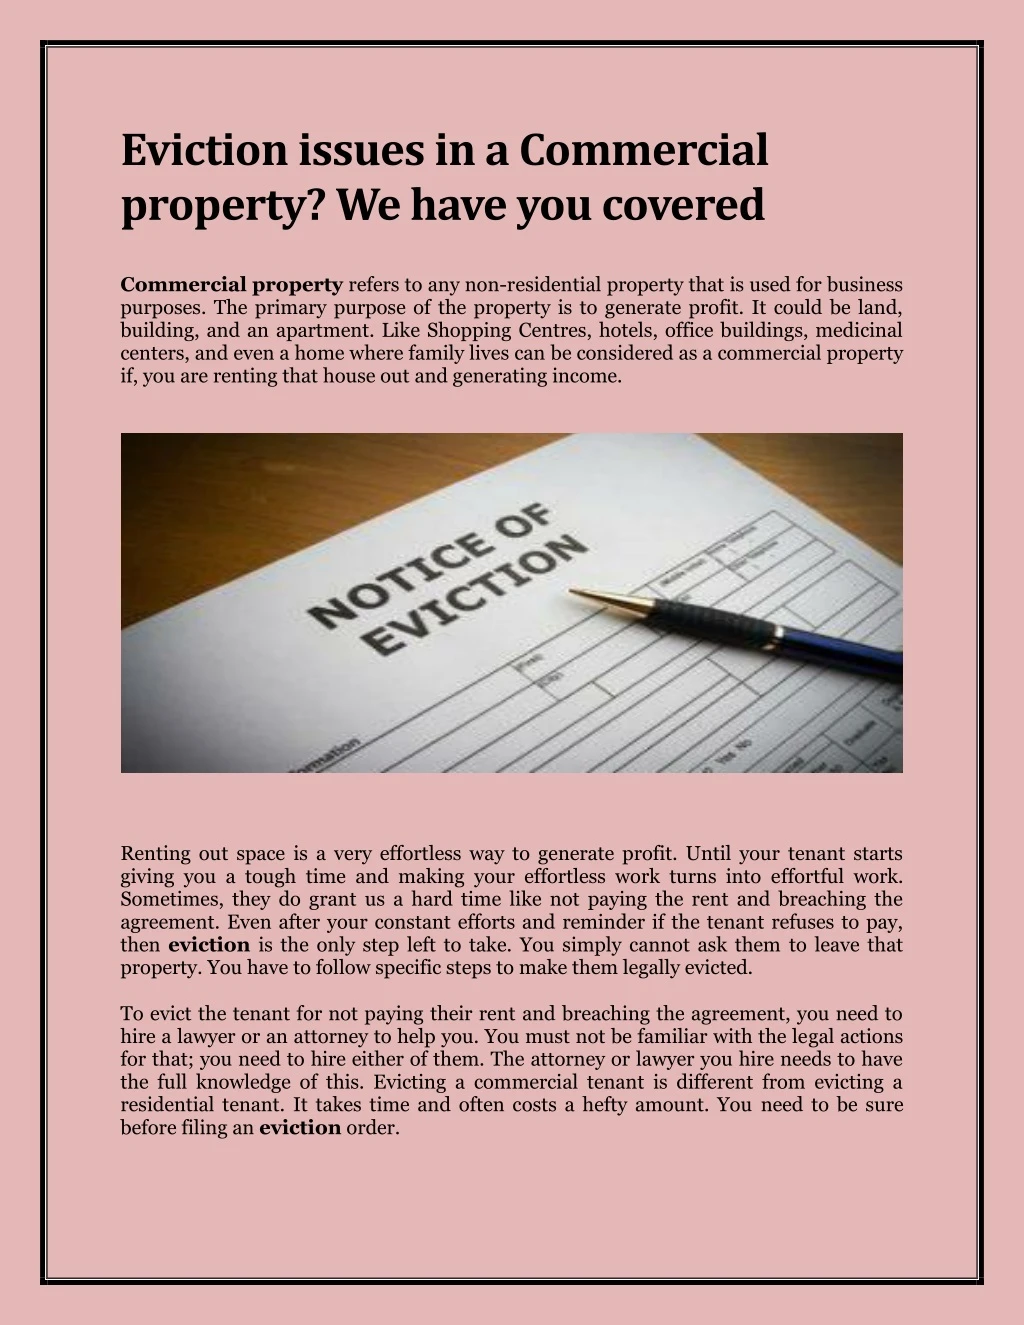 eviction issues in a commercial property we have